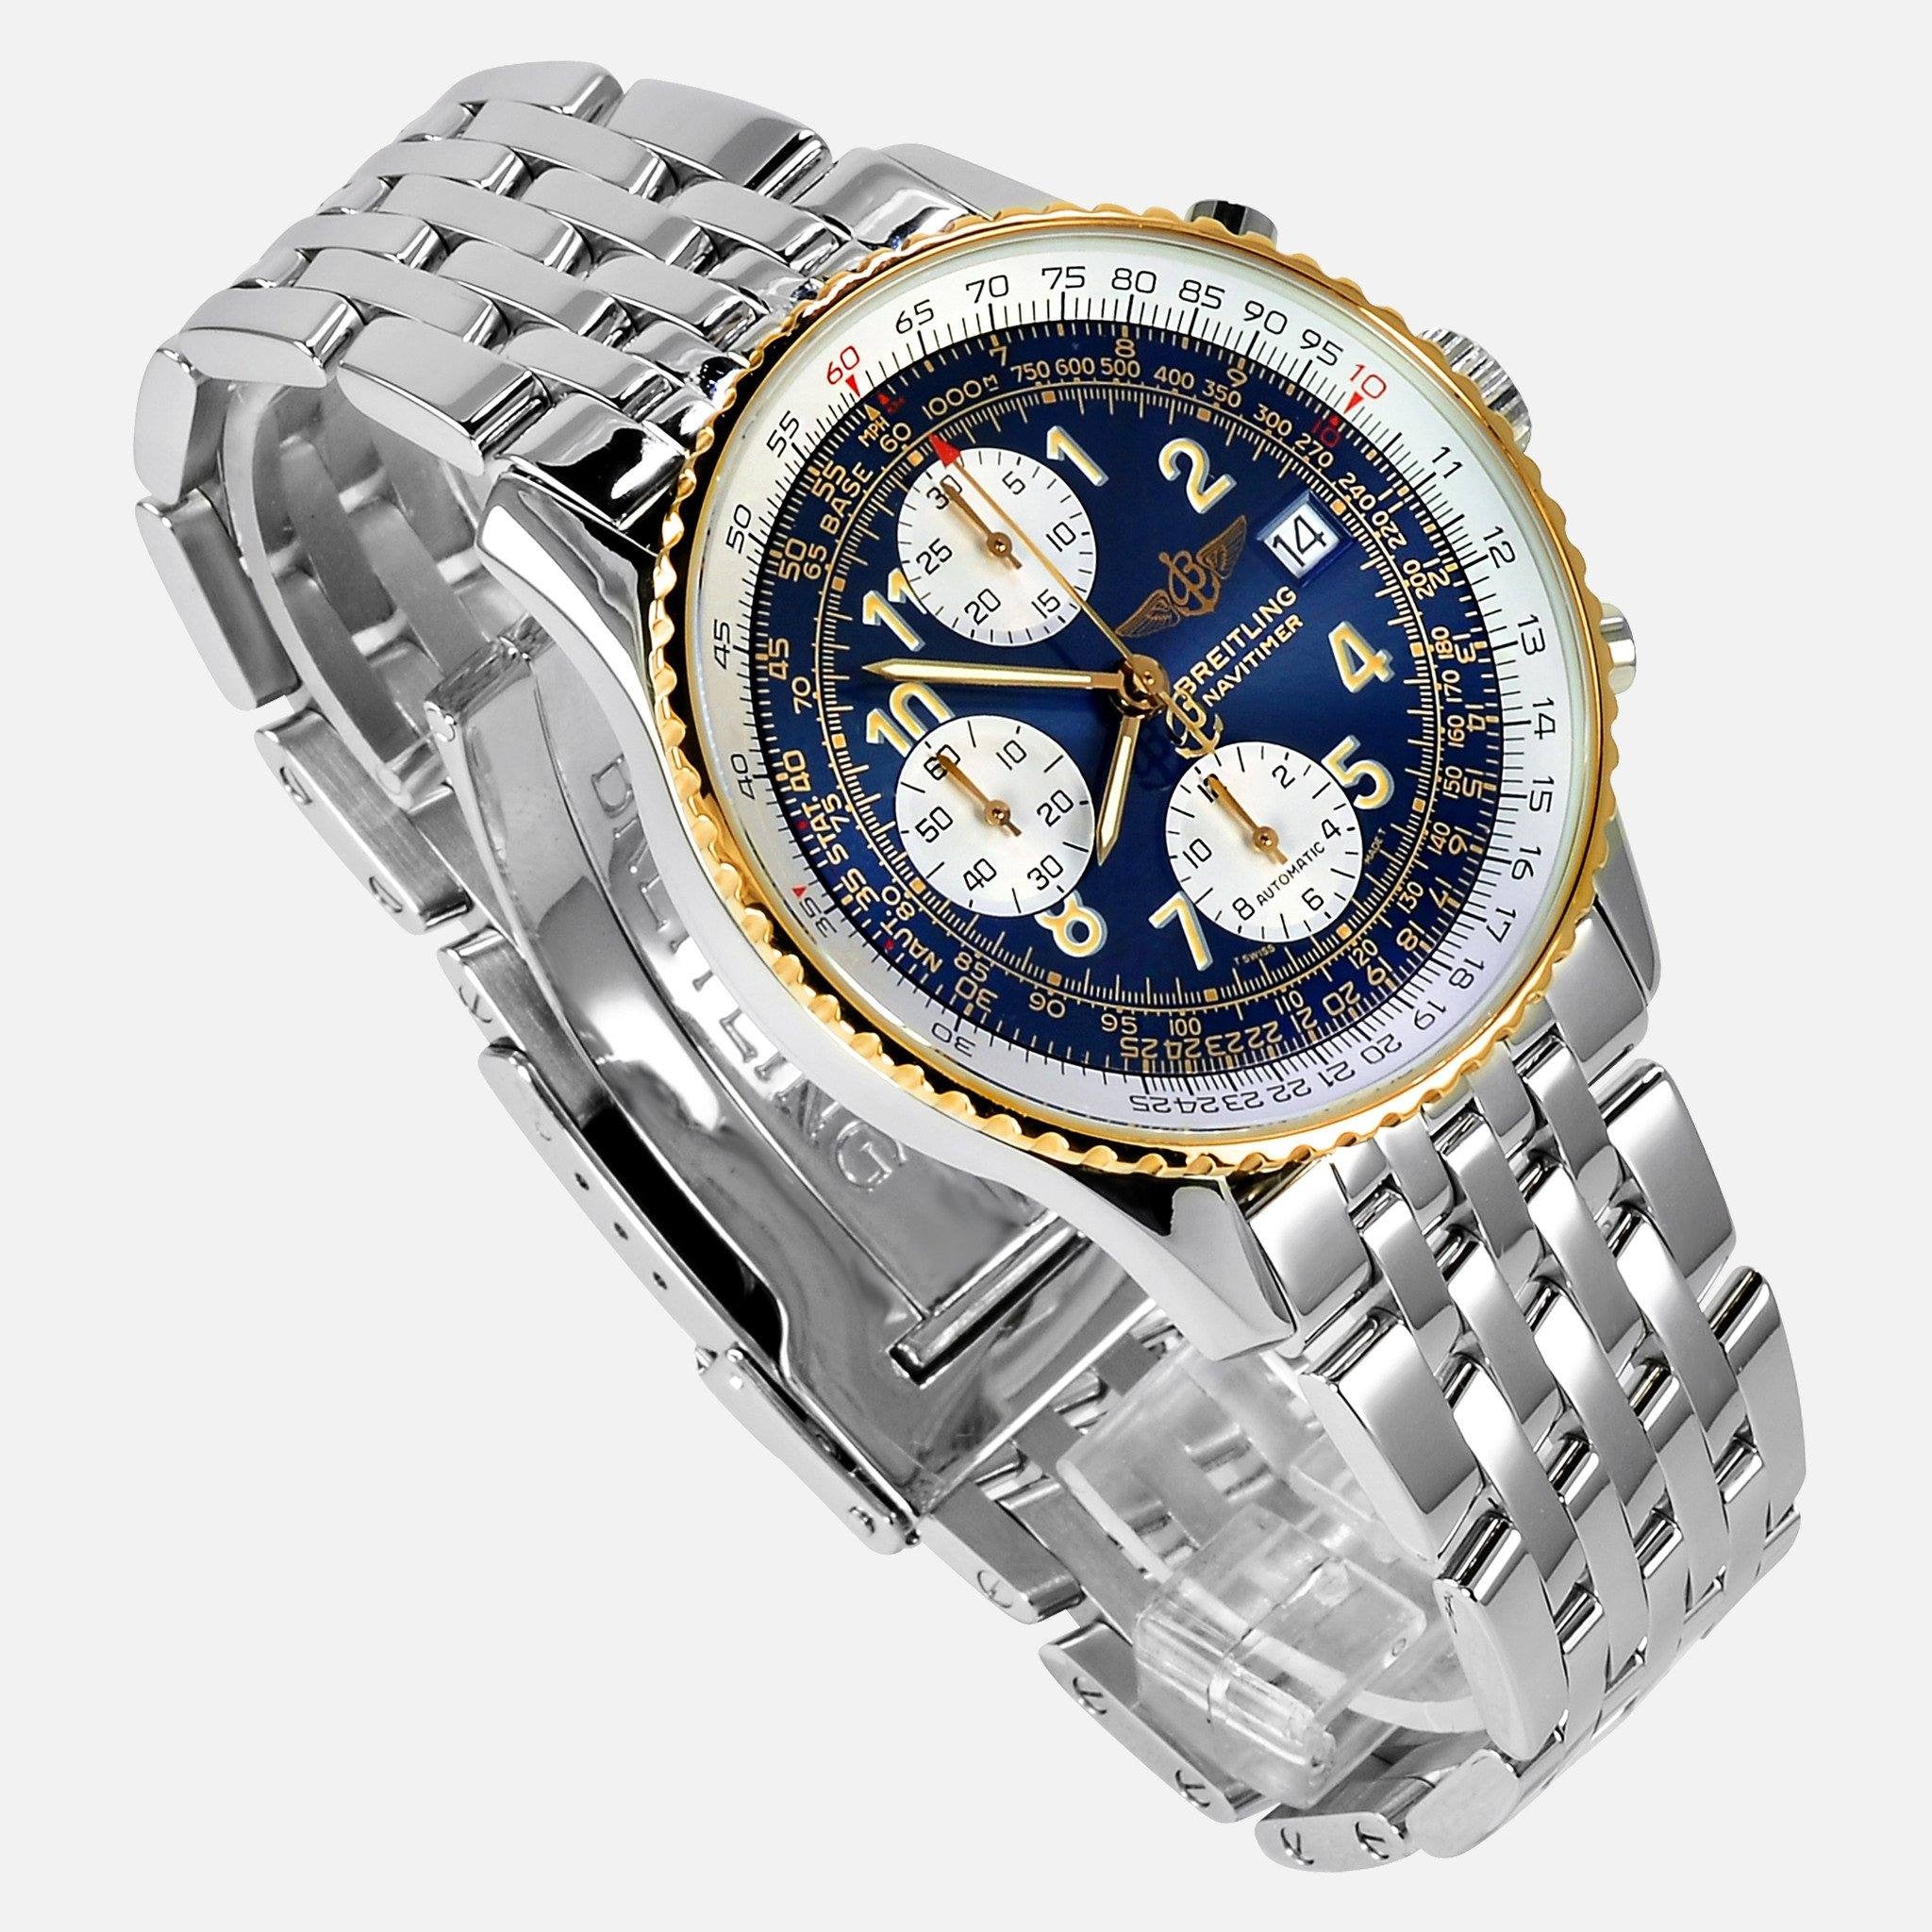 Breitling Navitimer Men's Black Watch with Stainless Steel/Yellow Gold  Bracelet - D13022 for sale online